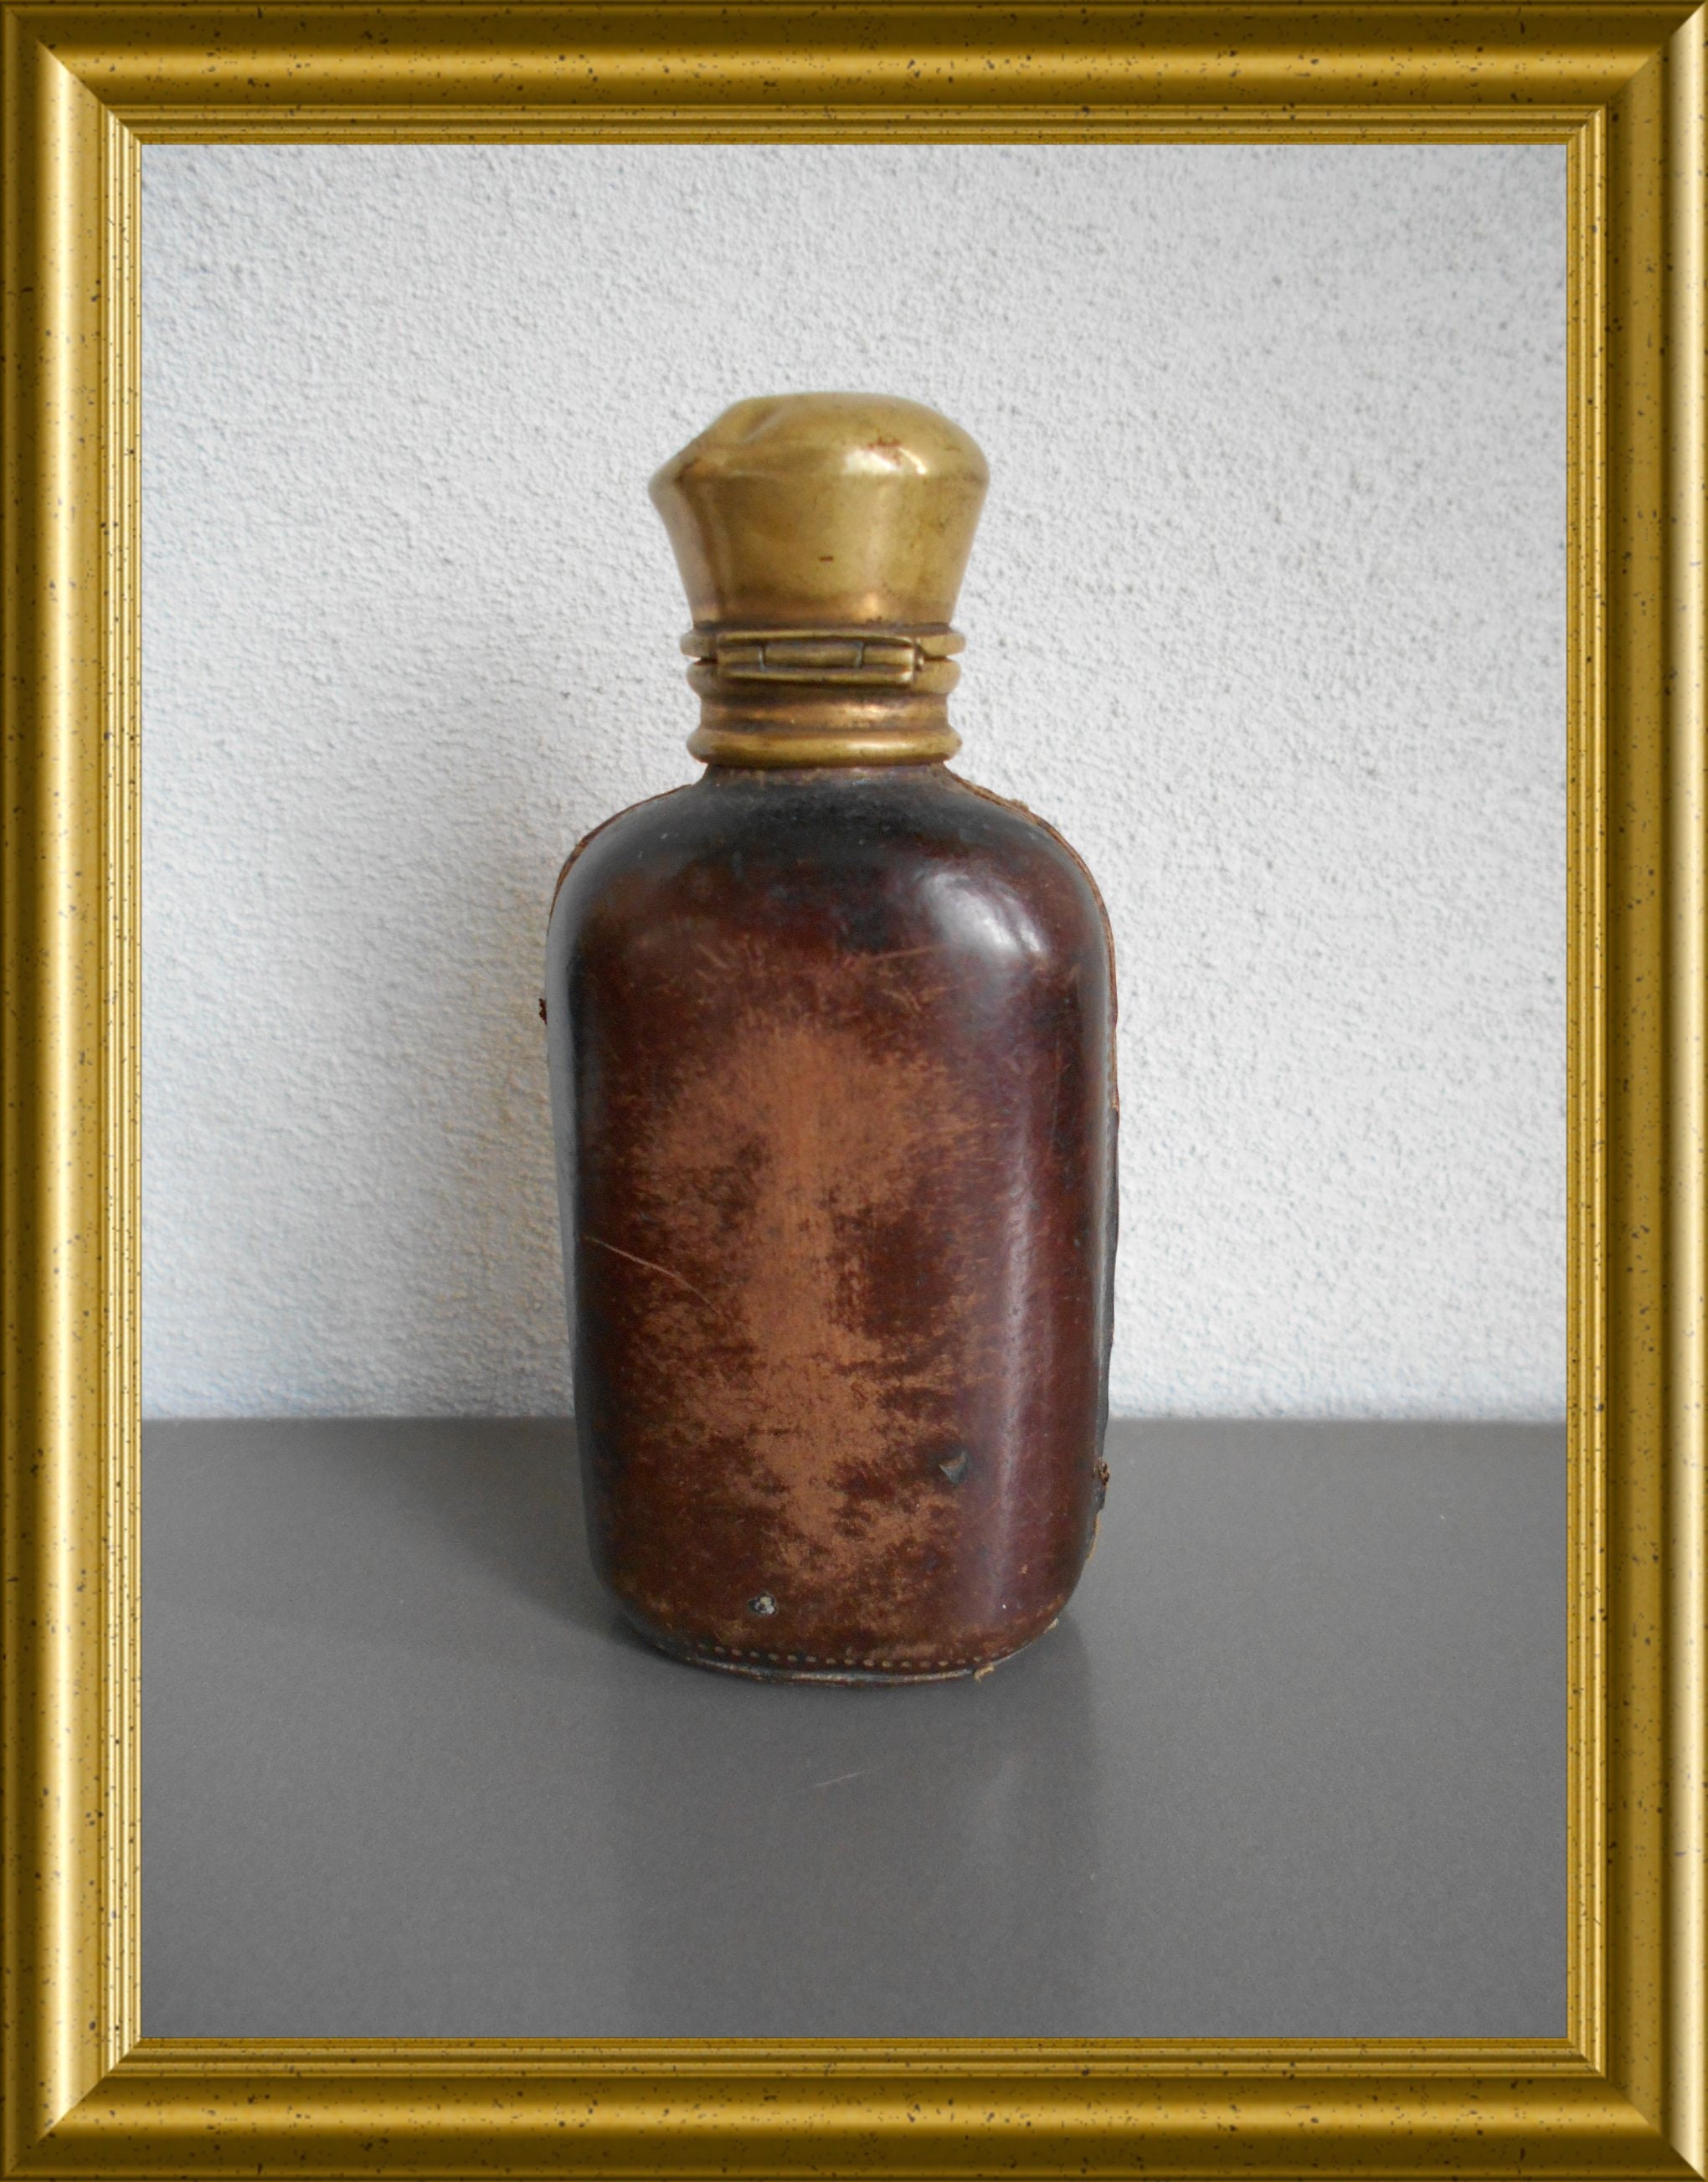 Antique Traveling Perfume Bottle in Leather Bound Ornate Case and Blue  Velvet, 1800s for sale at Pamono